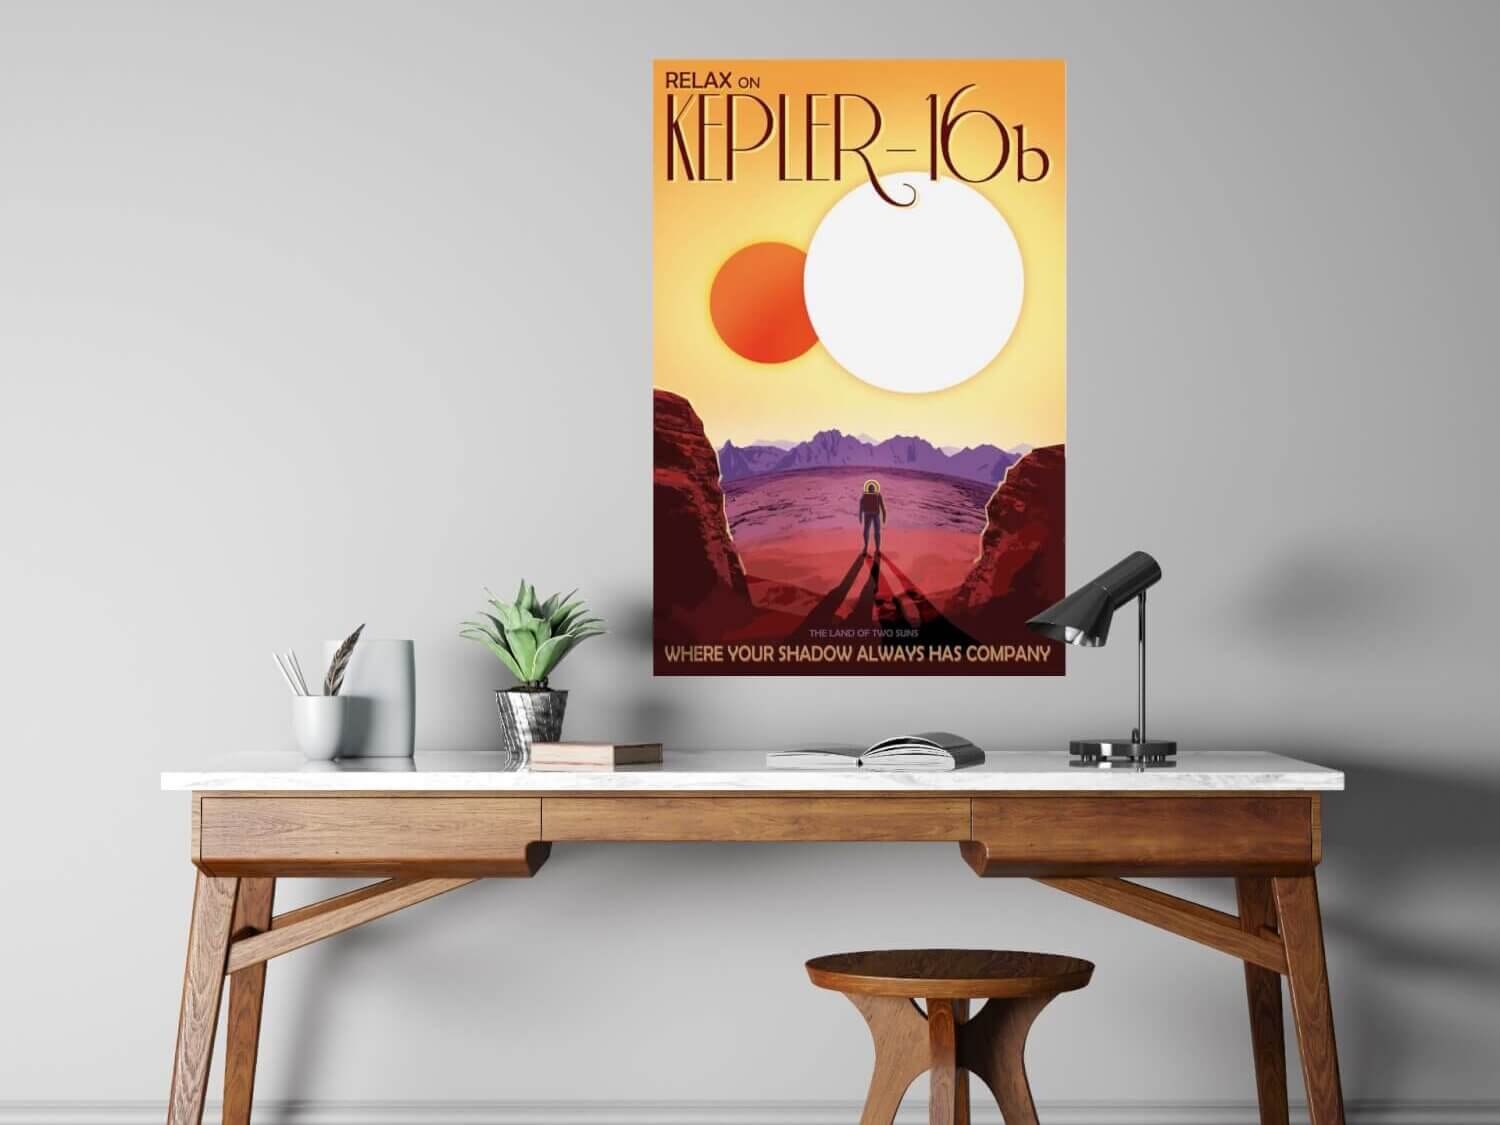 A free print design created by NASA's design team depicts a space traveler standing before the two suns of planet Kepler-16b.